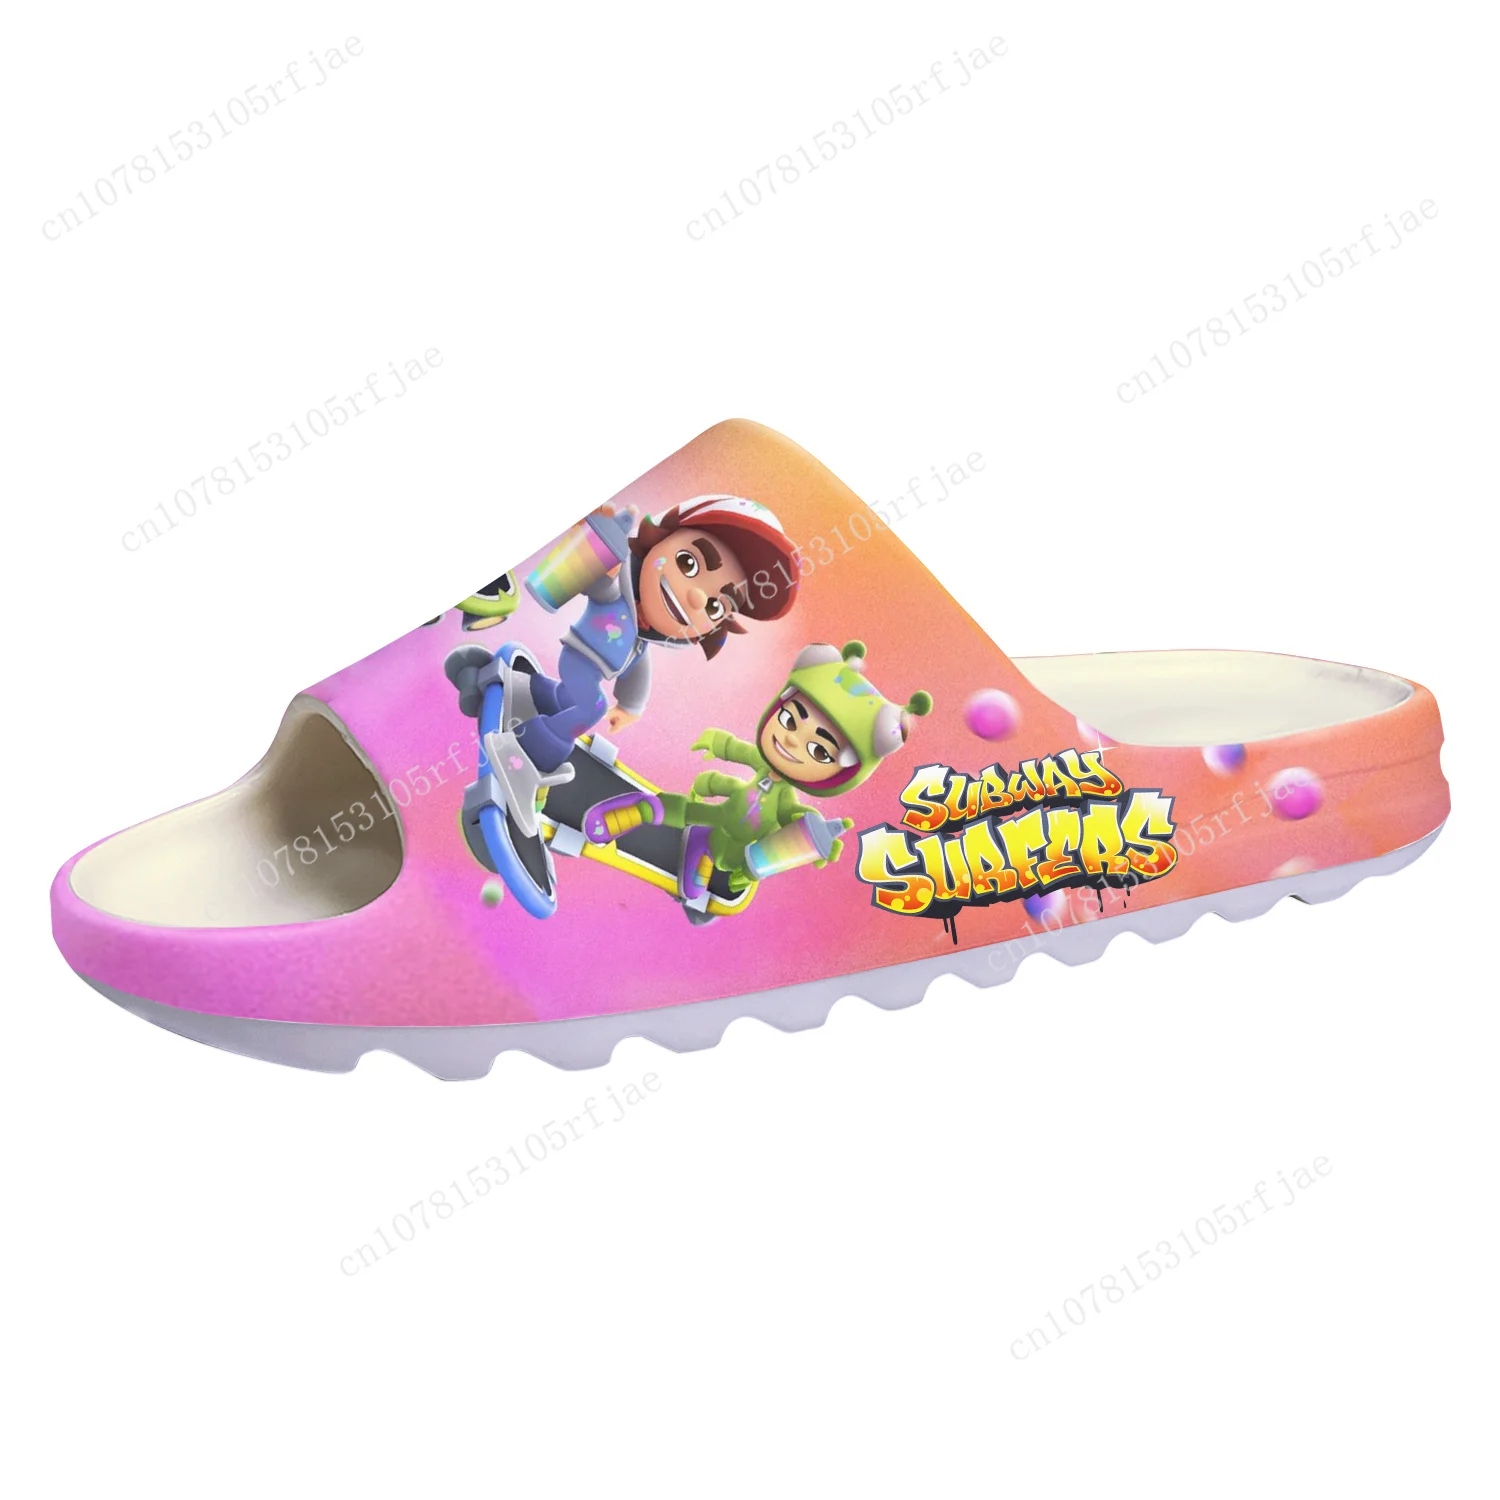 

Anime Cartoon Game Subway Surfers Soft Sole Sllipers Mens Womens Teenager Home Clogs Fashion Custom Water Shoes on Shit Sandals